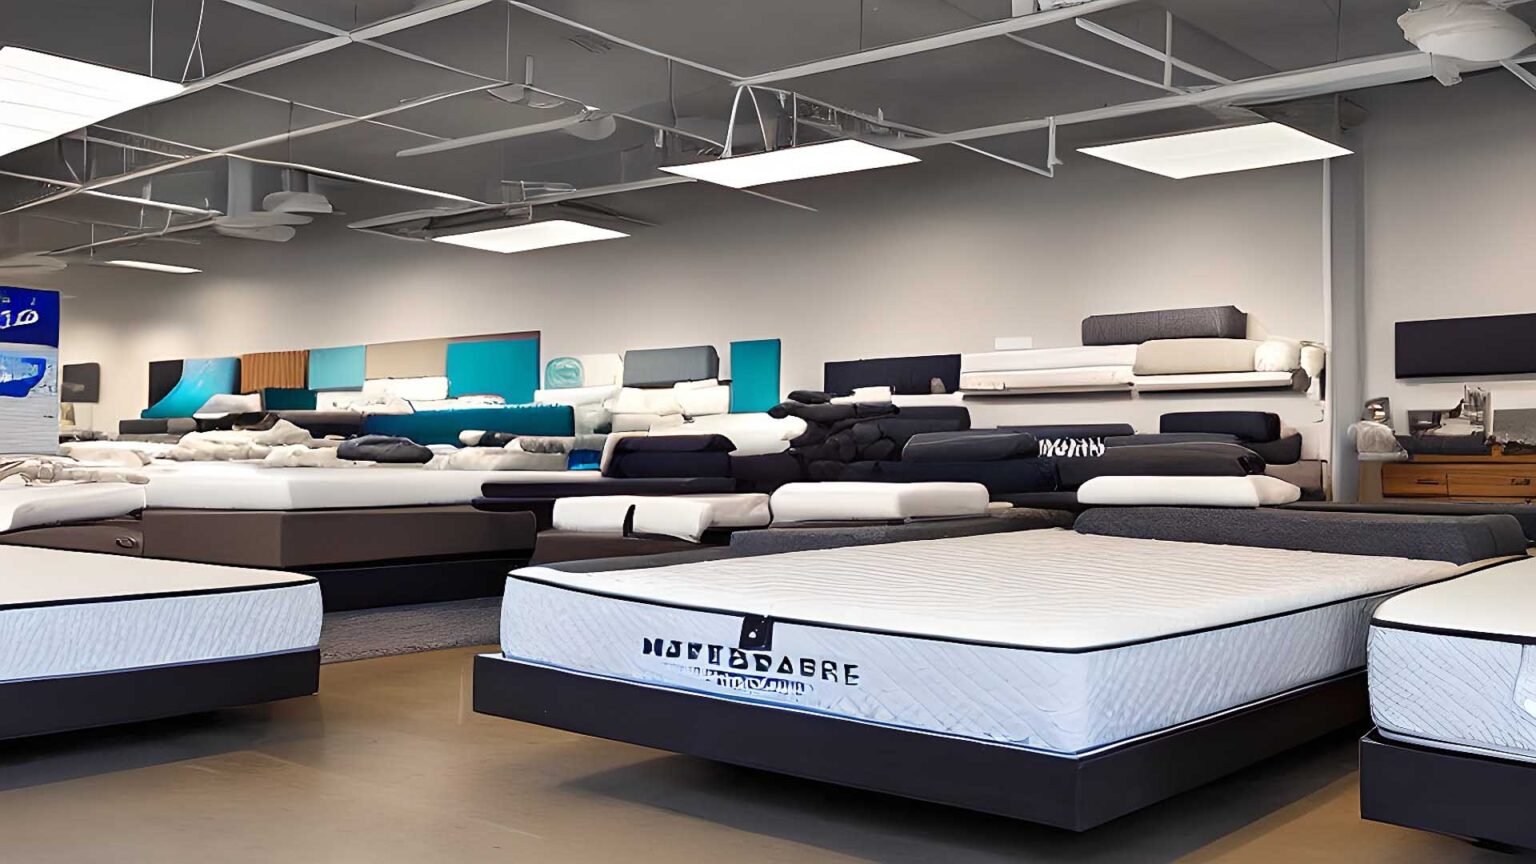 Mattress Stores, mattress dealers, and mattress retailers near me in Clay, NY